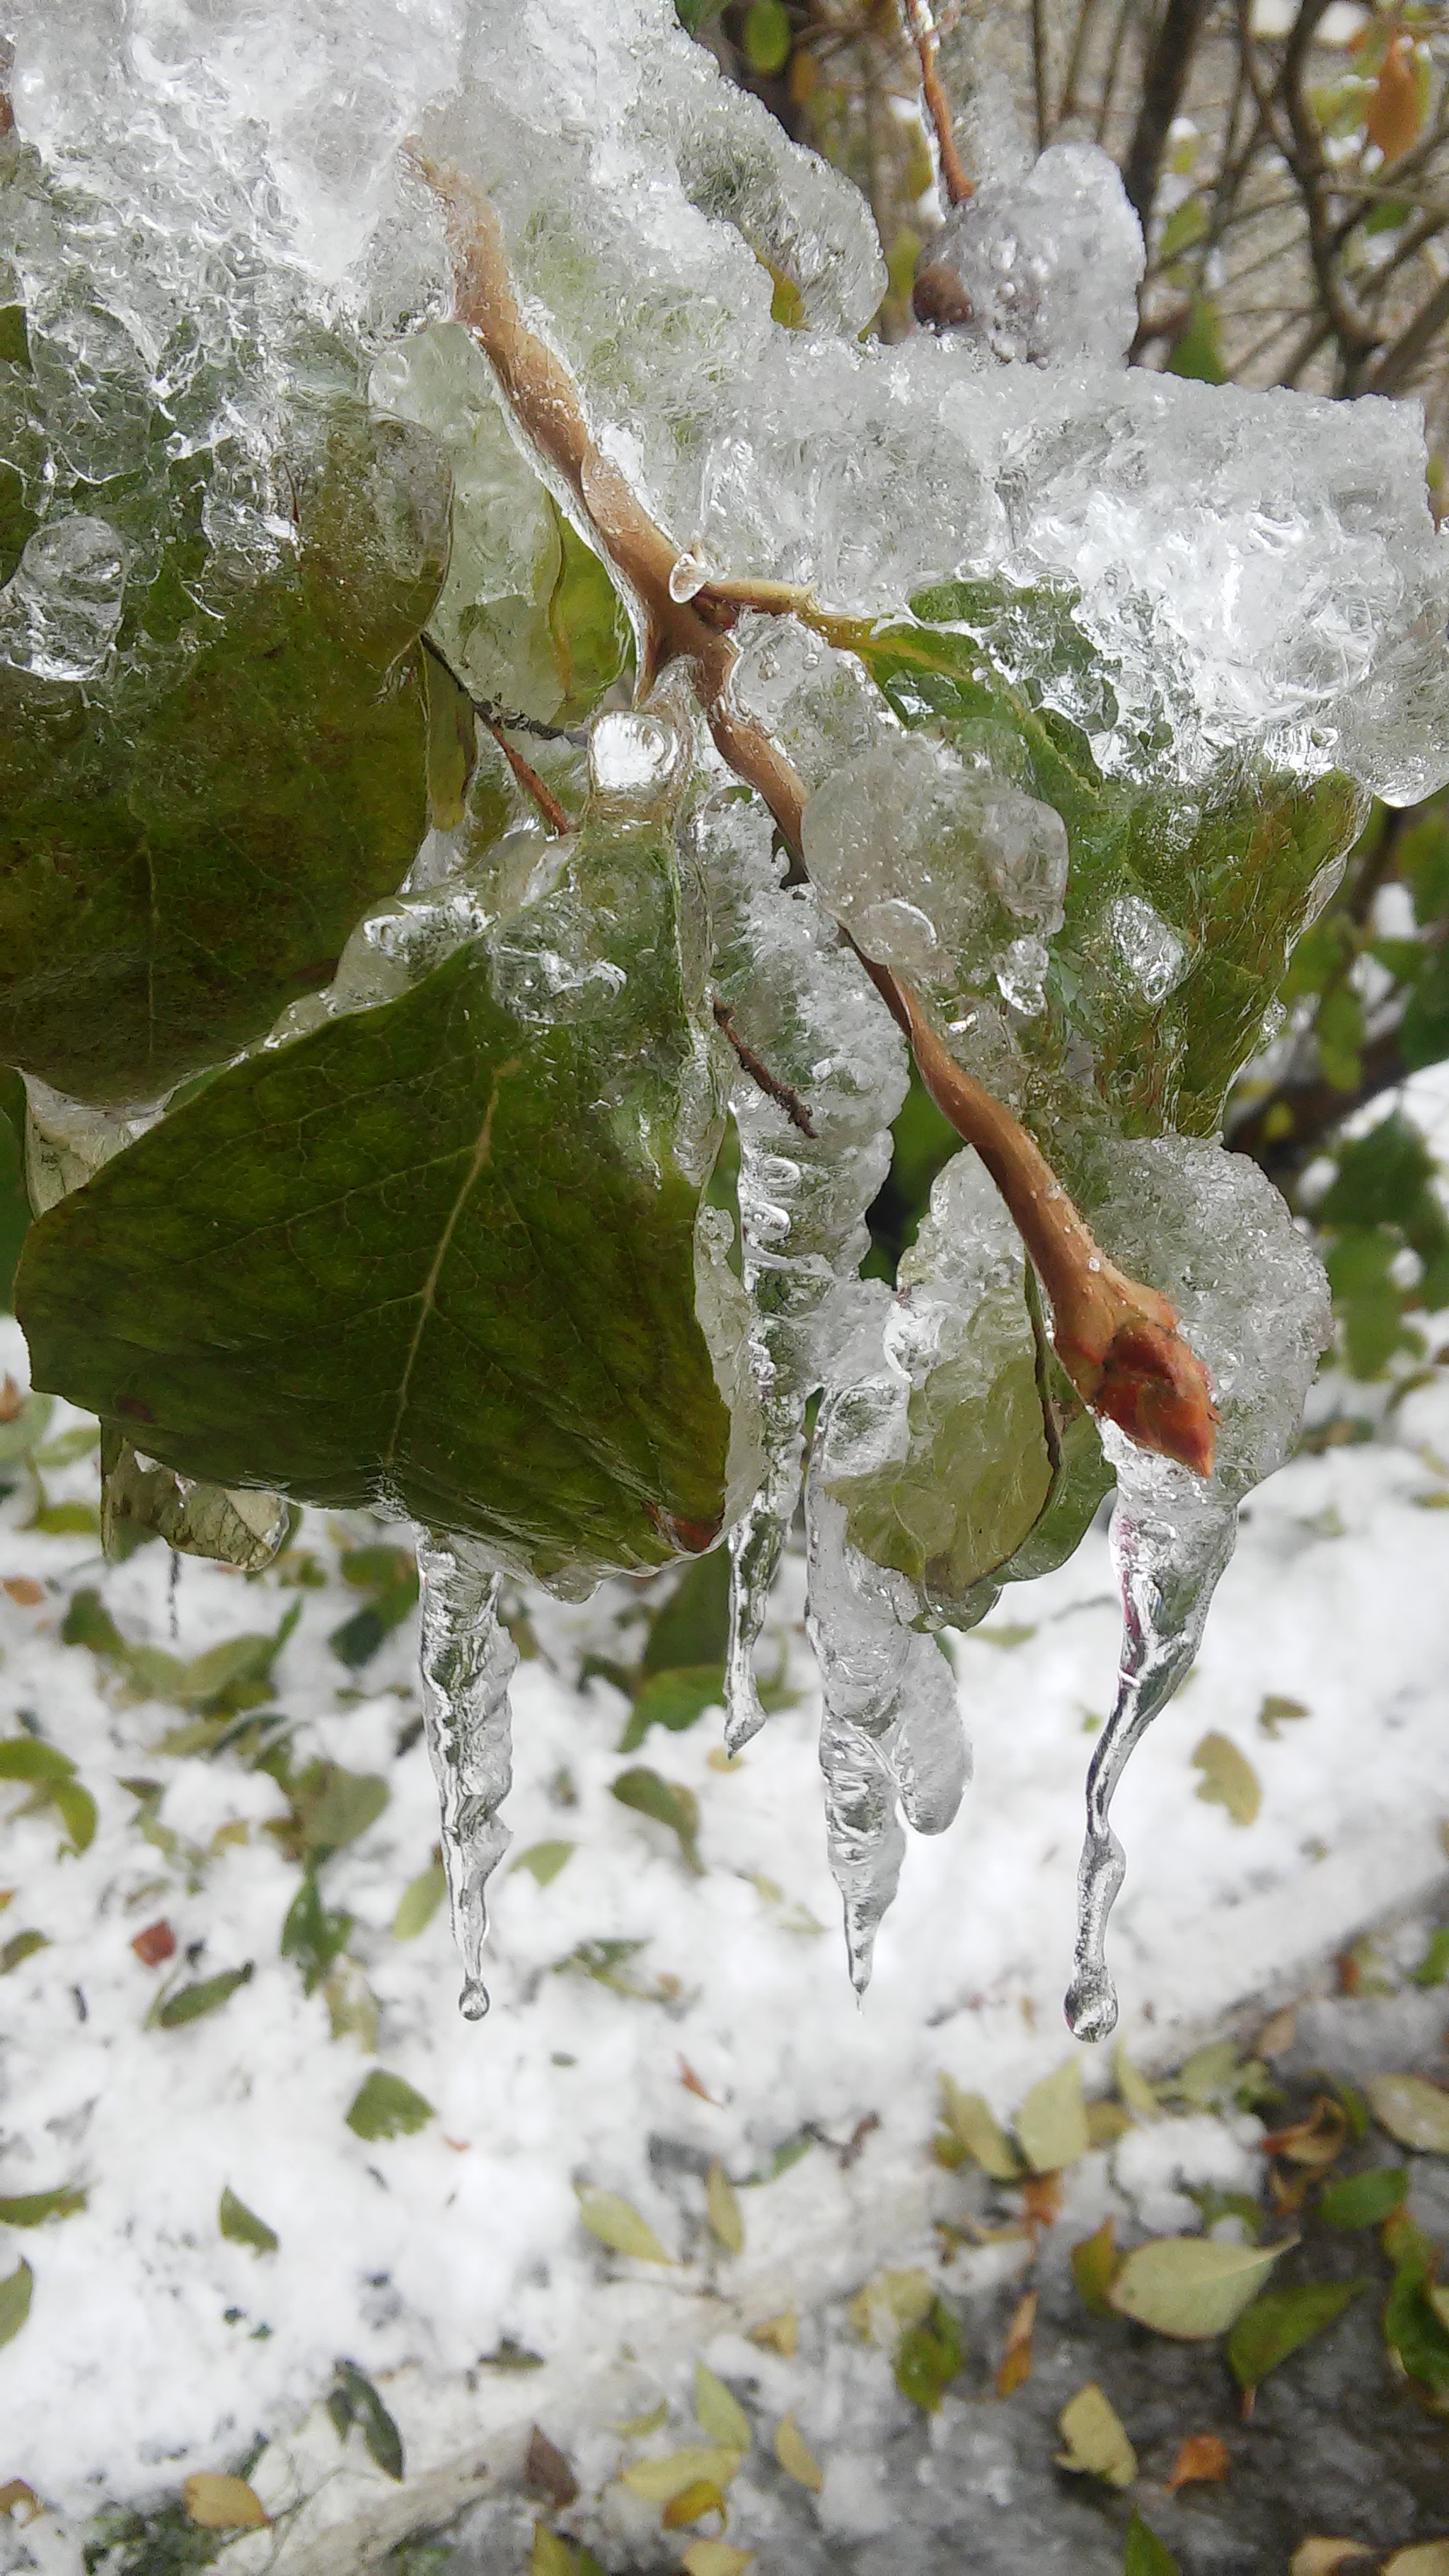 LG G3 S sample photo. Leaves and ice photography